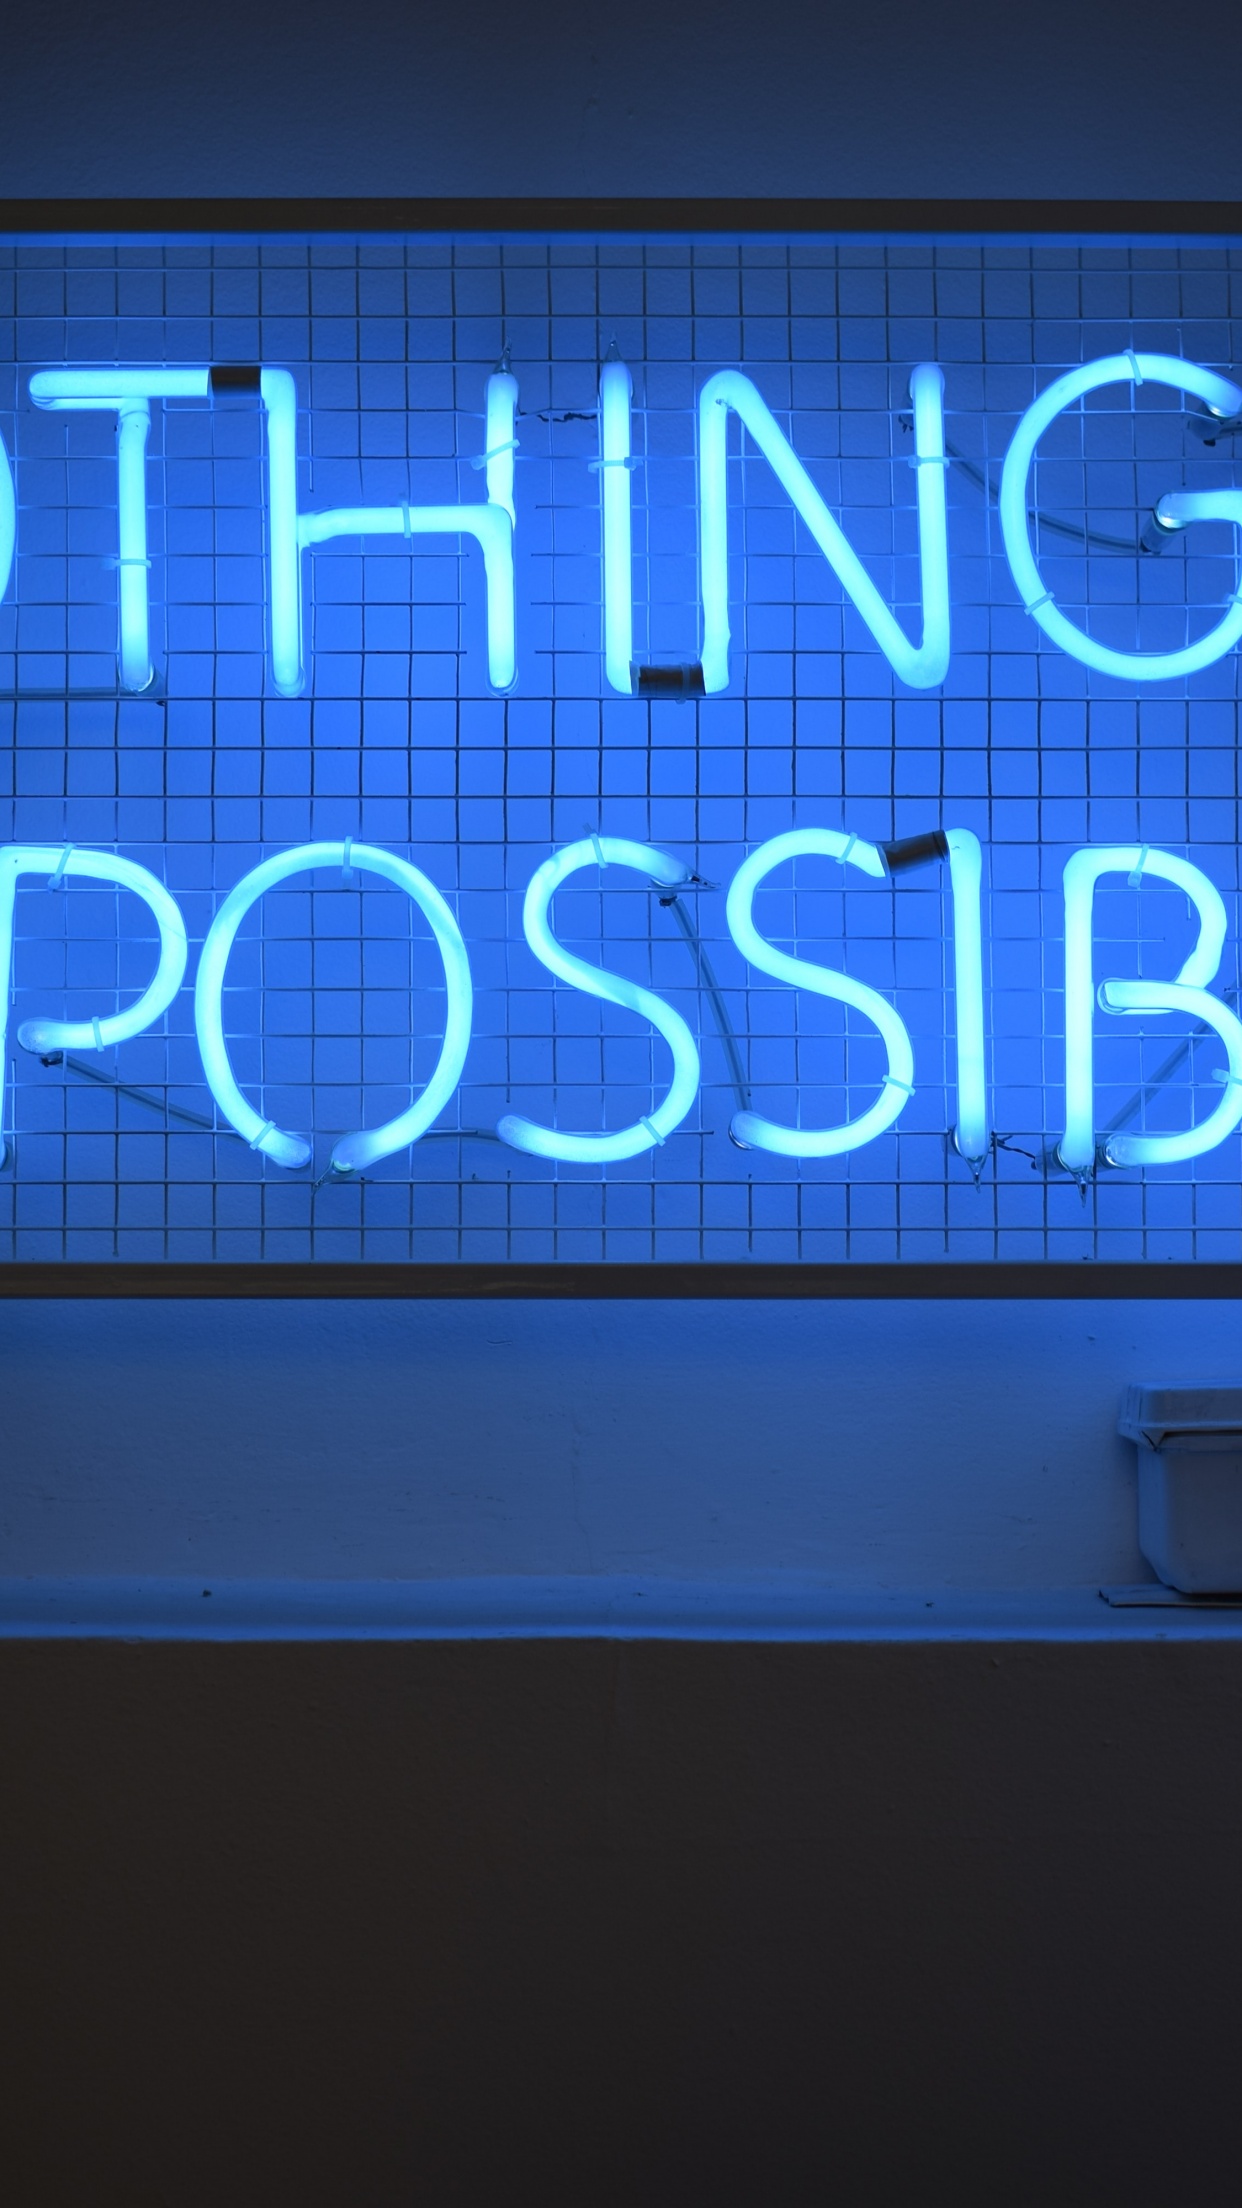 Nothing is Impossible Wallpaper 4K, Neon sign, Blue light, Motivational